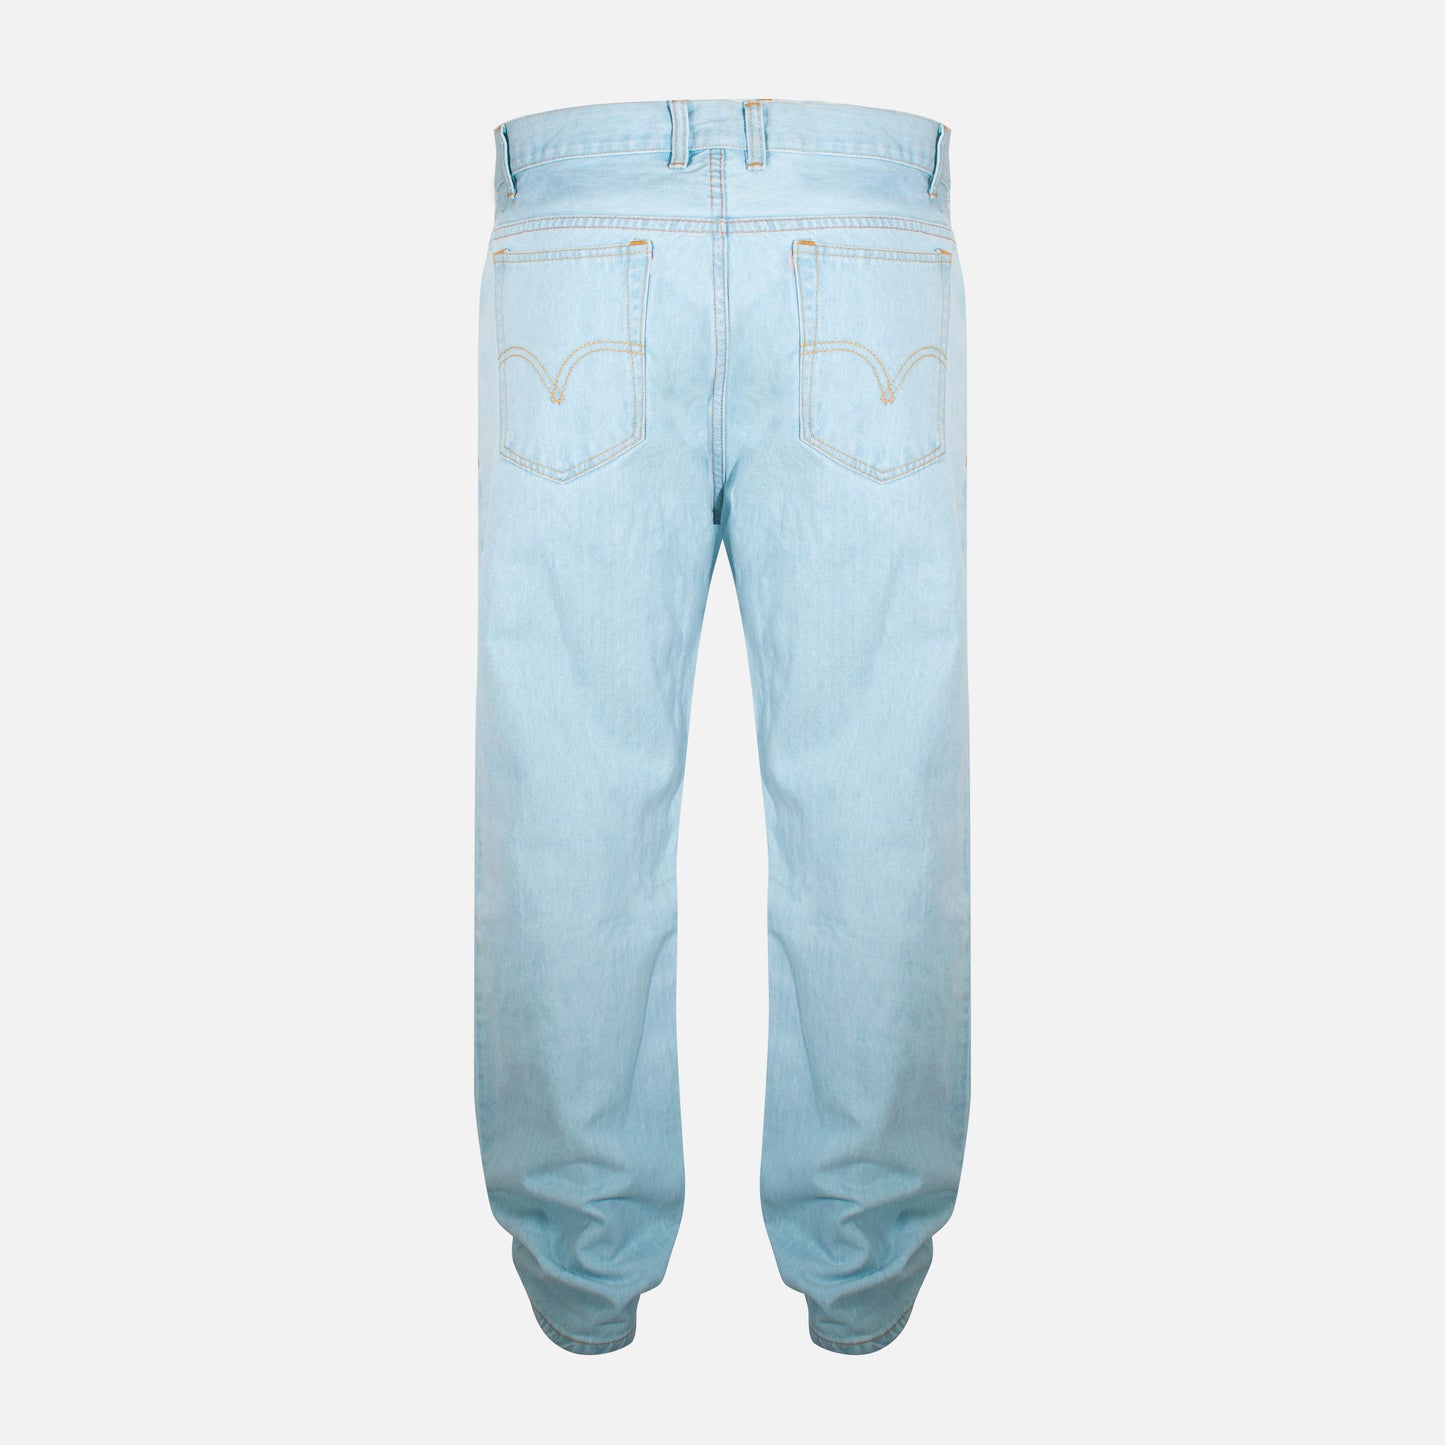 BAGGY JEAN ESSENTIAL BLUE ICE